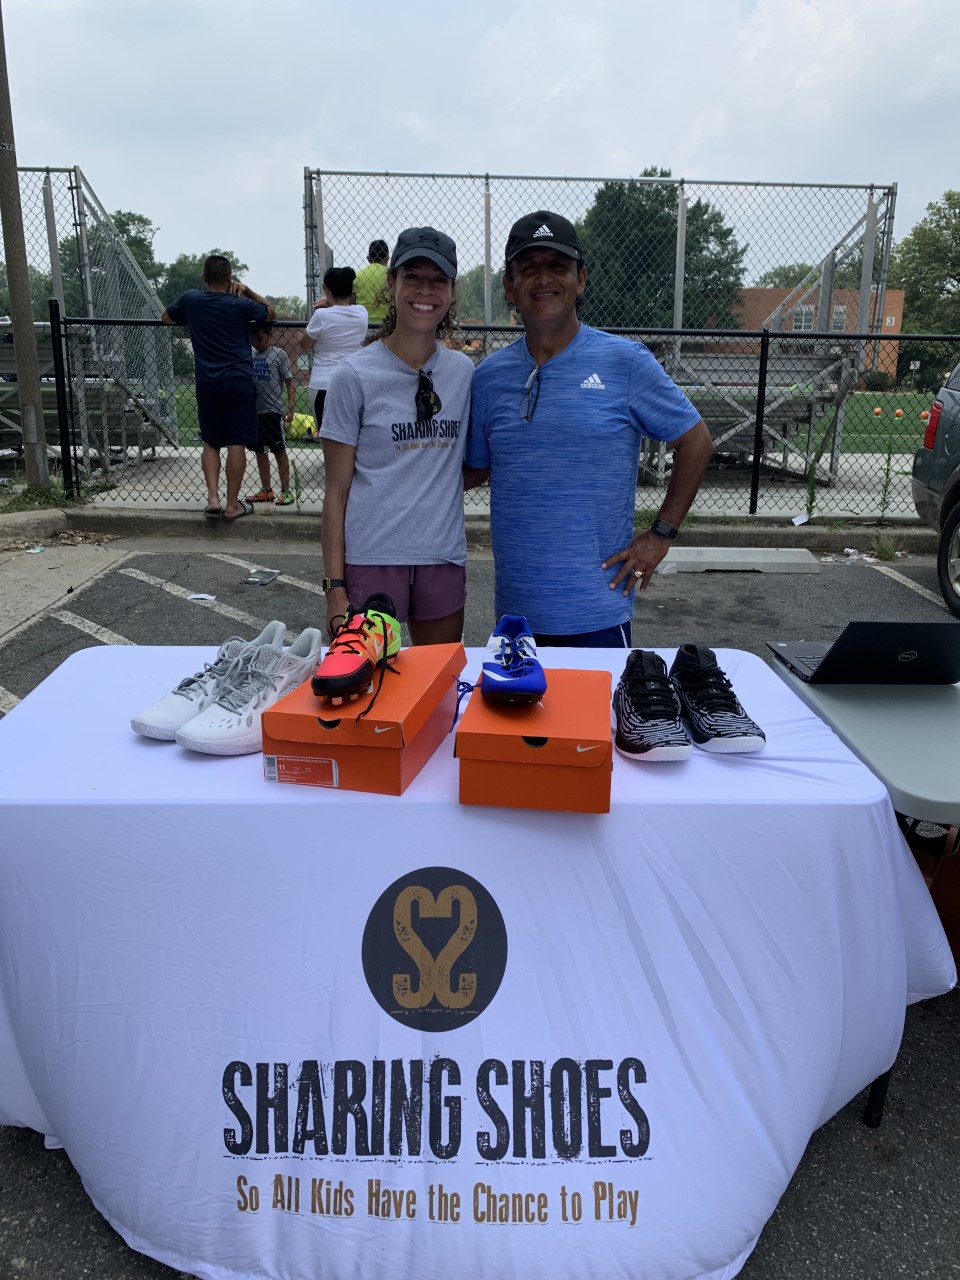 Sharing Shoes event